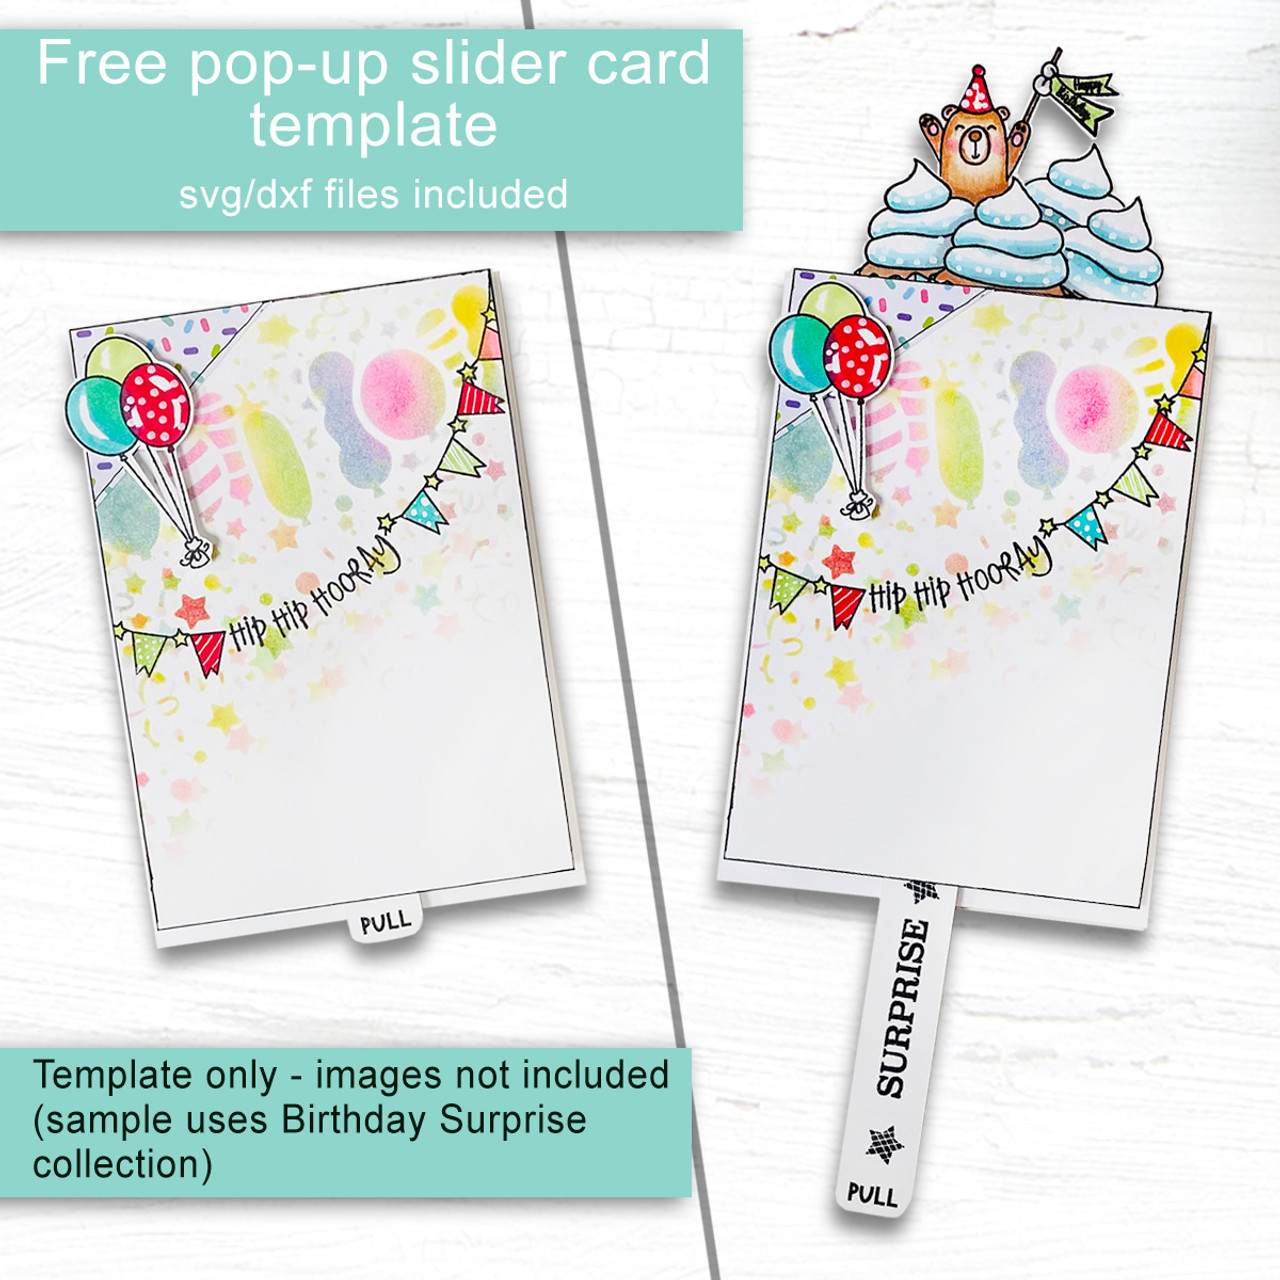 https://cdn11.bigcommerce.com/s-4xtiv/images/stencil/1280x1280/products/5159/27529/Nikky-birthday-template-svg__65984.1620116868.jpg?c=2